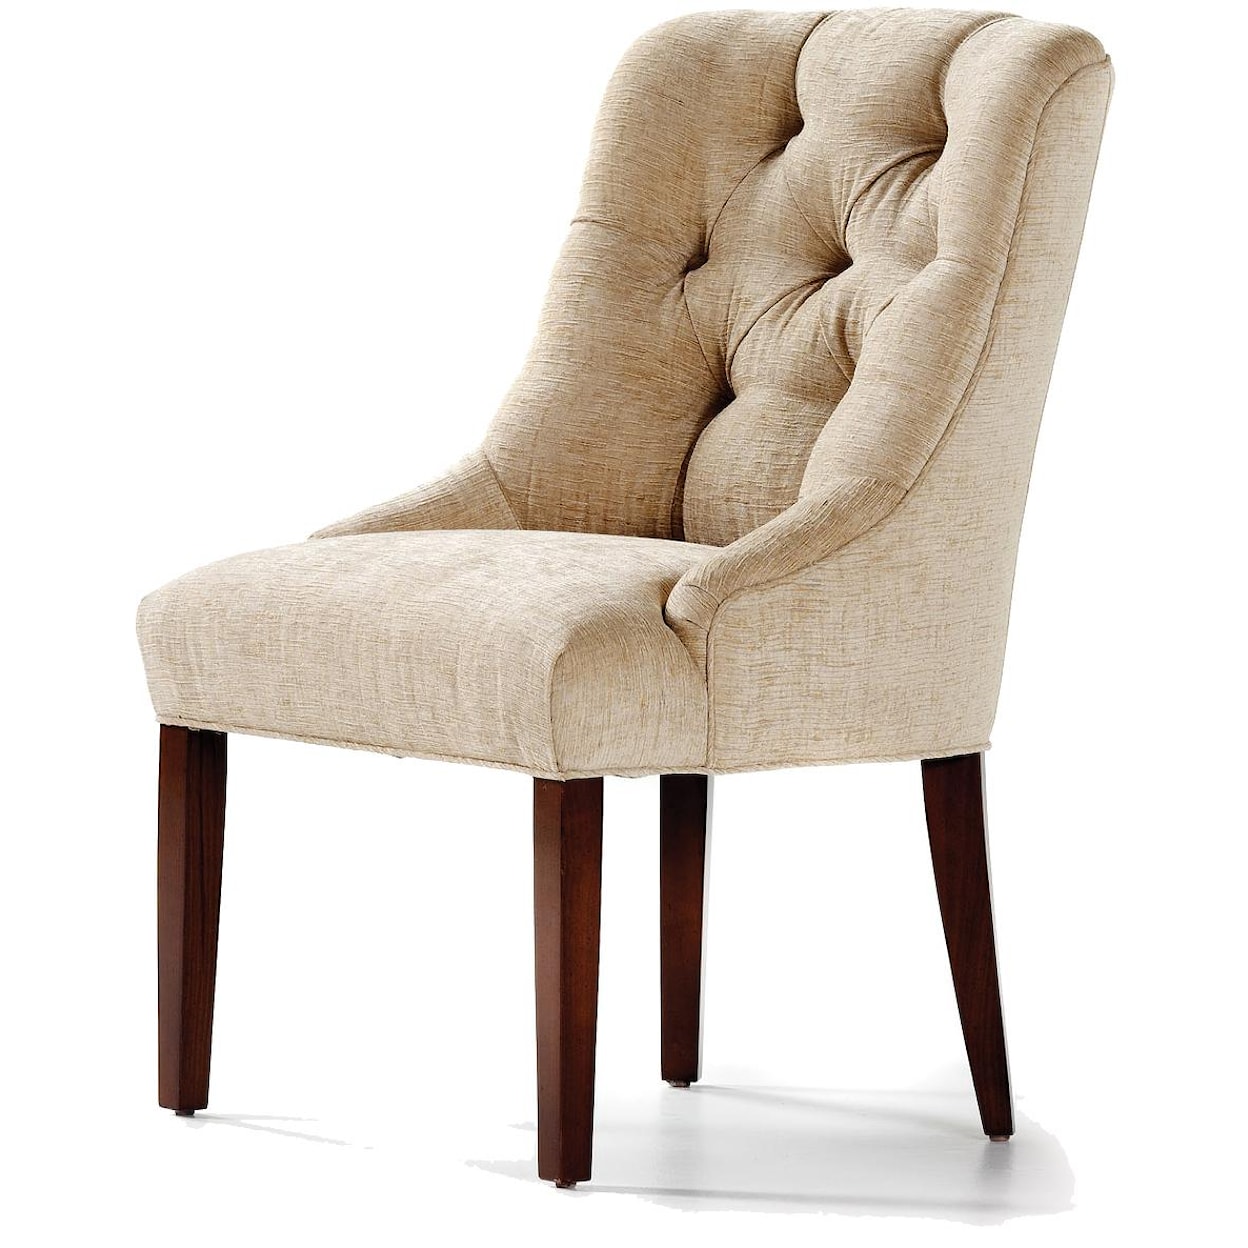 Jessica Charles Fine Upholstered Accents Bartlett Dining Chair   